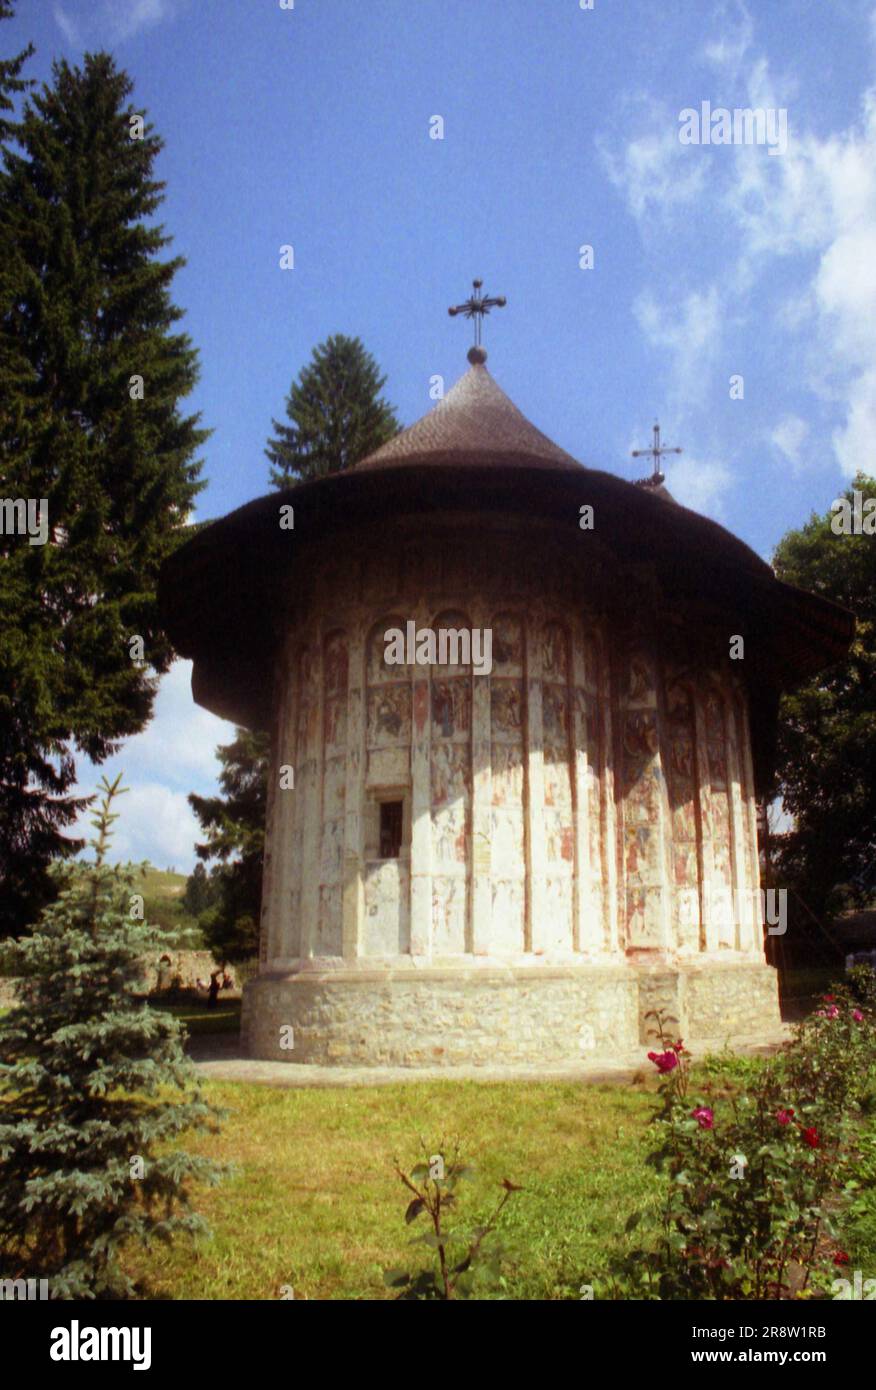 Gura Humorului, Suceava County, Romania, 1998. Exterior view of Humor Monastery, a historical monument from 1530. Stock Photo